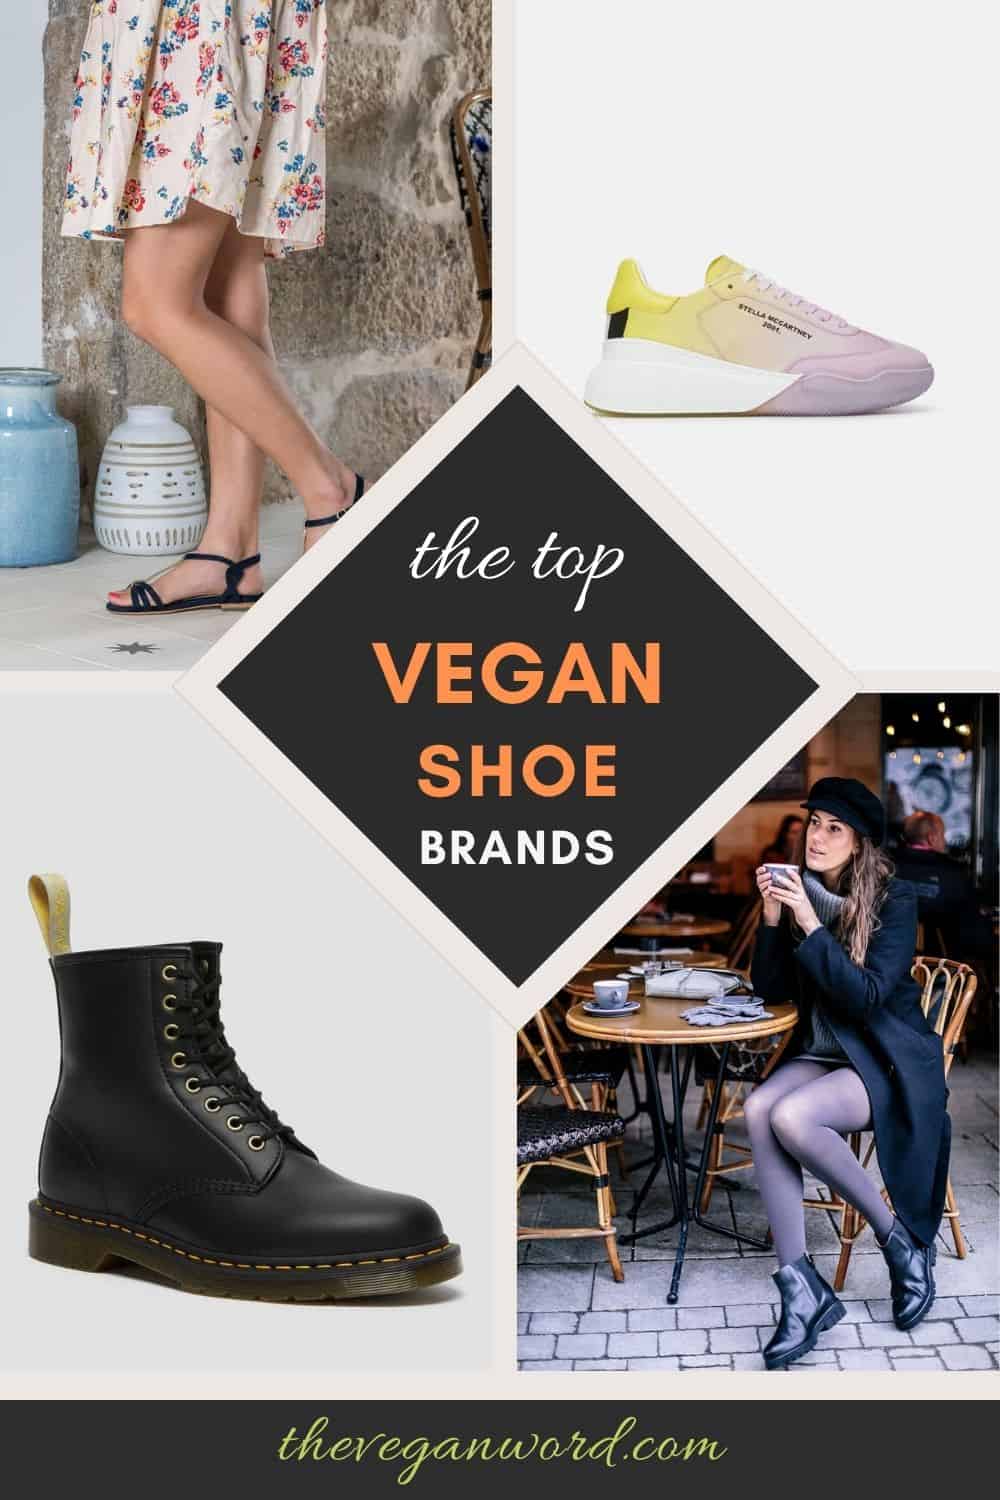 Pinterest image of different vegan shoes with text that reads "the top vegan shoe brands"